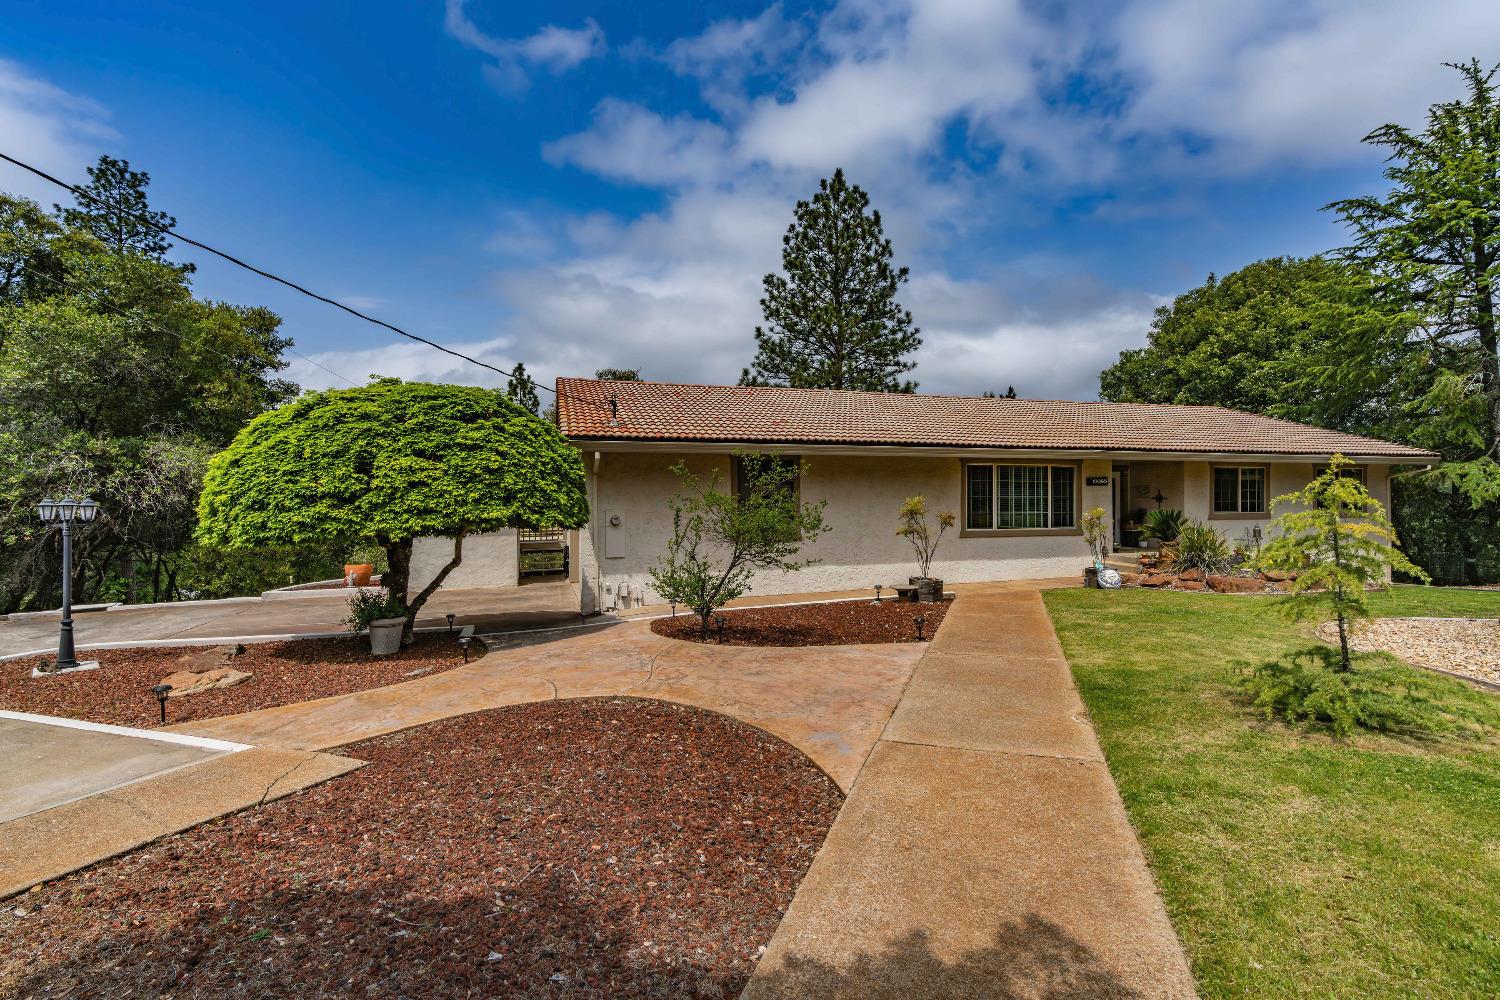 Photo of 17065 Niles Rd in Jackson, CA